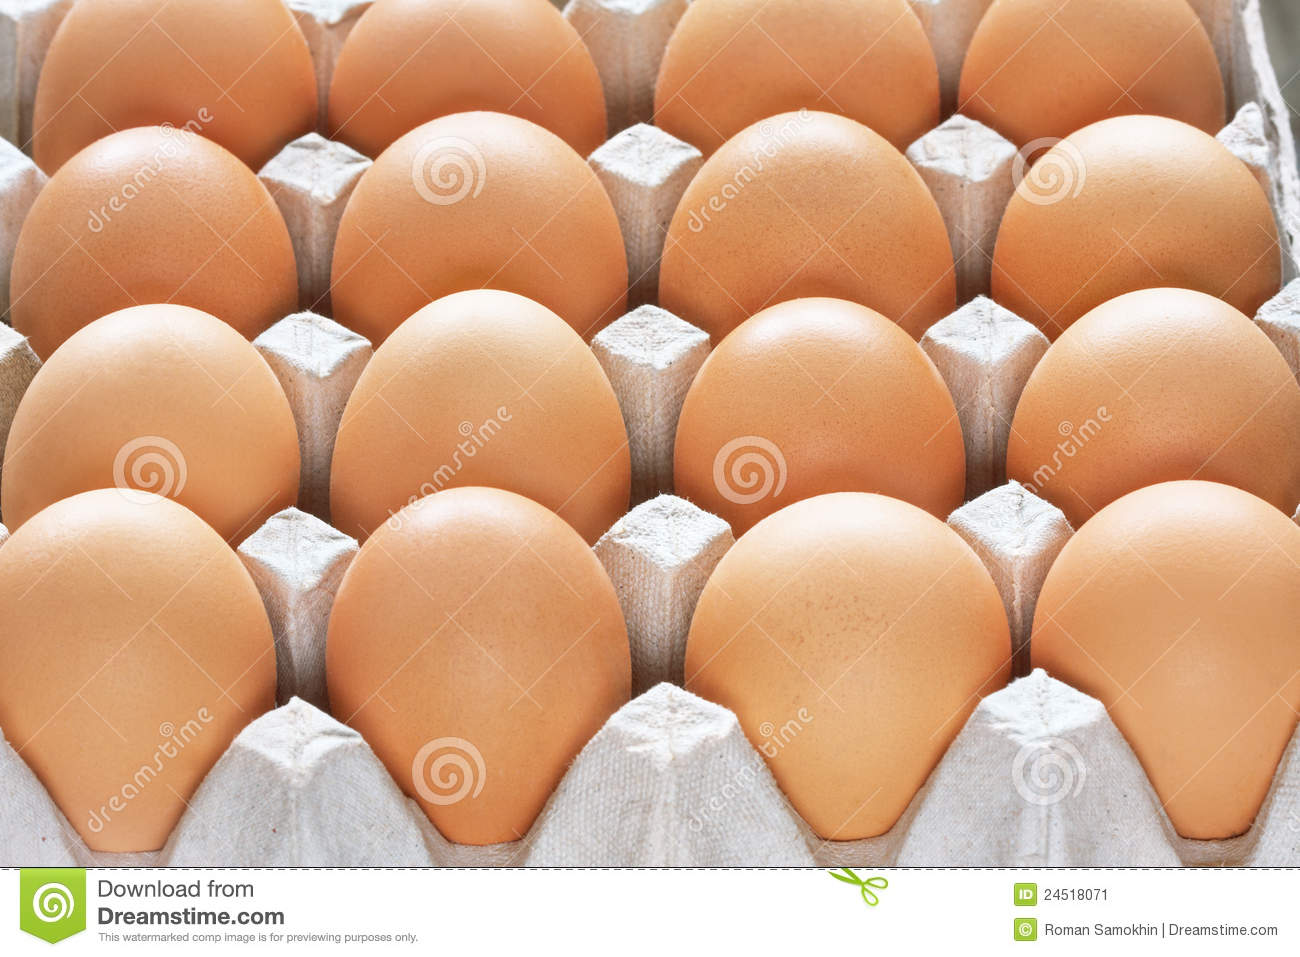 Many Brown Eggs In Carton Tray Stock Image   Image  24518071